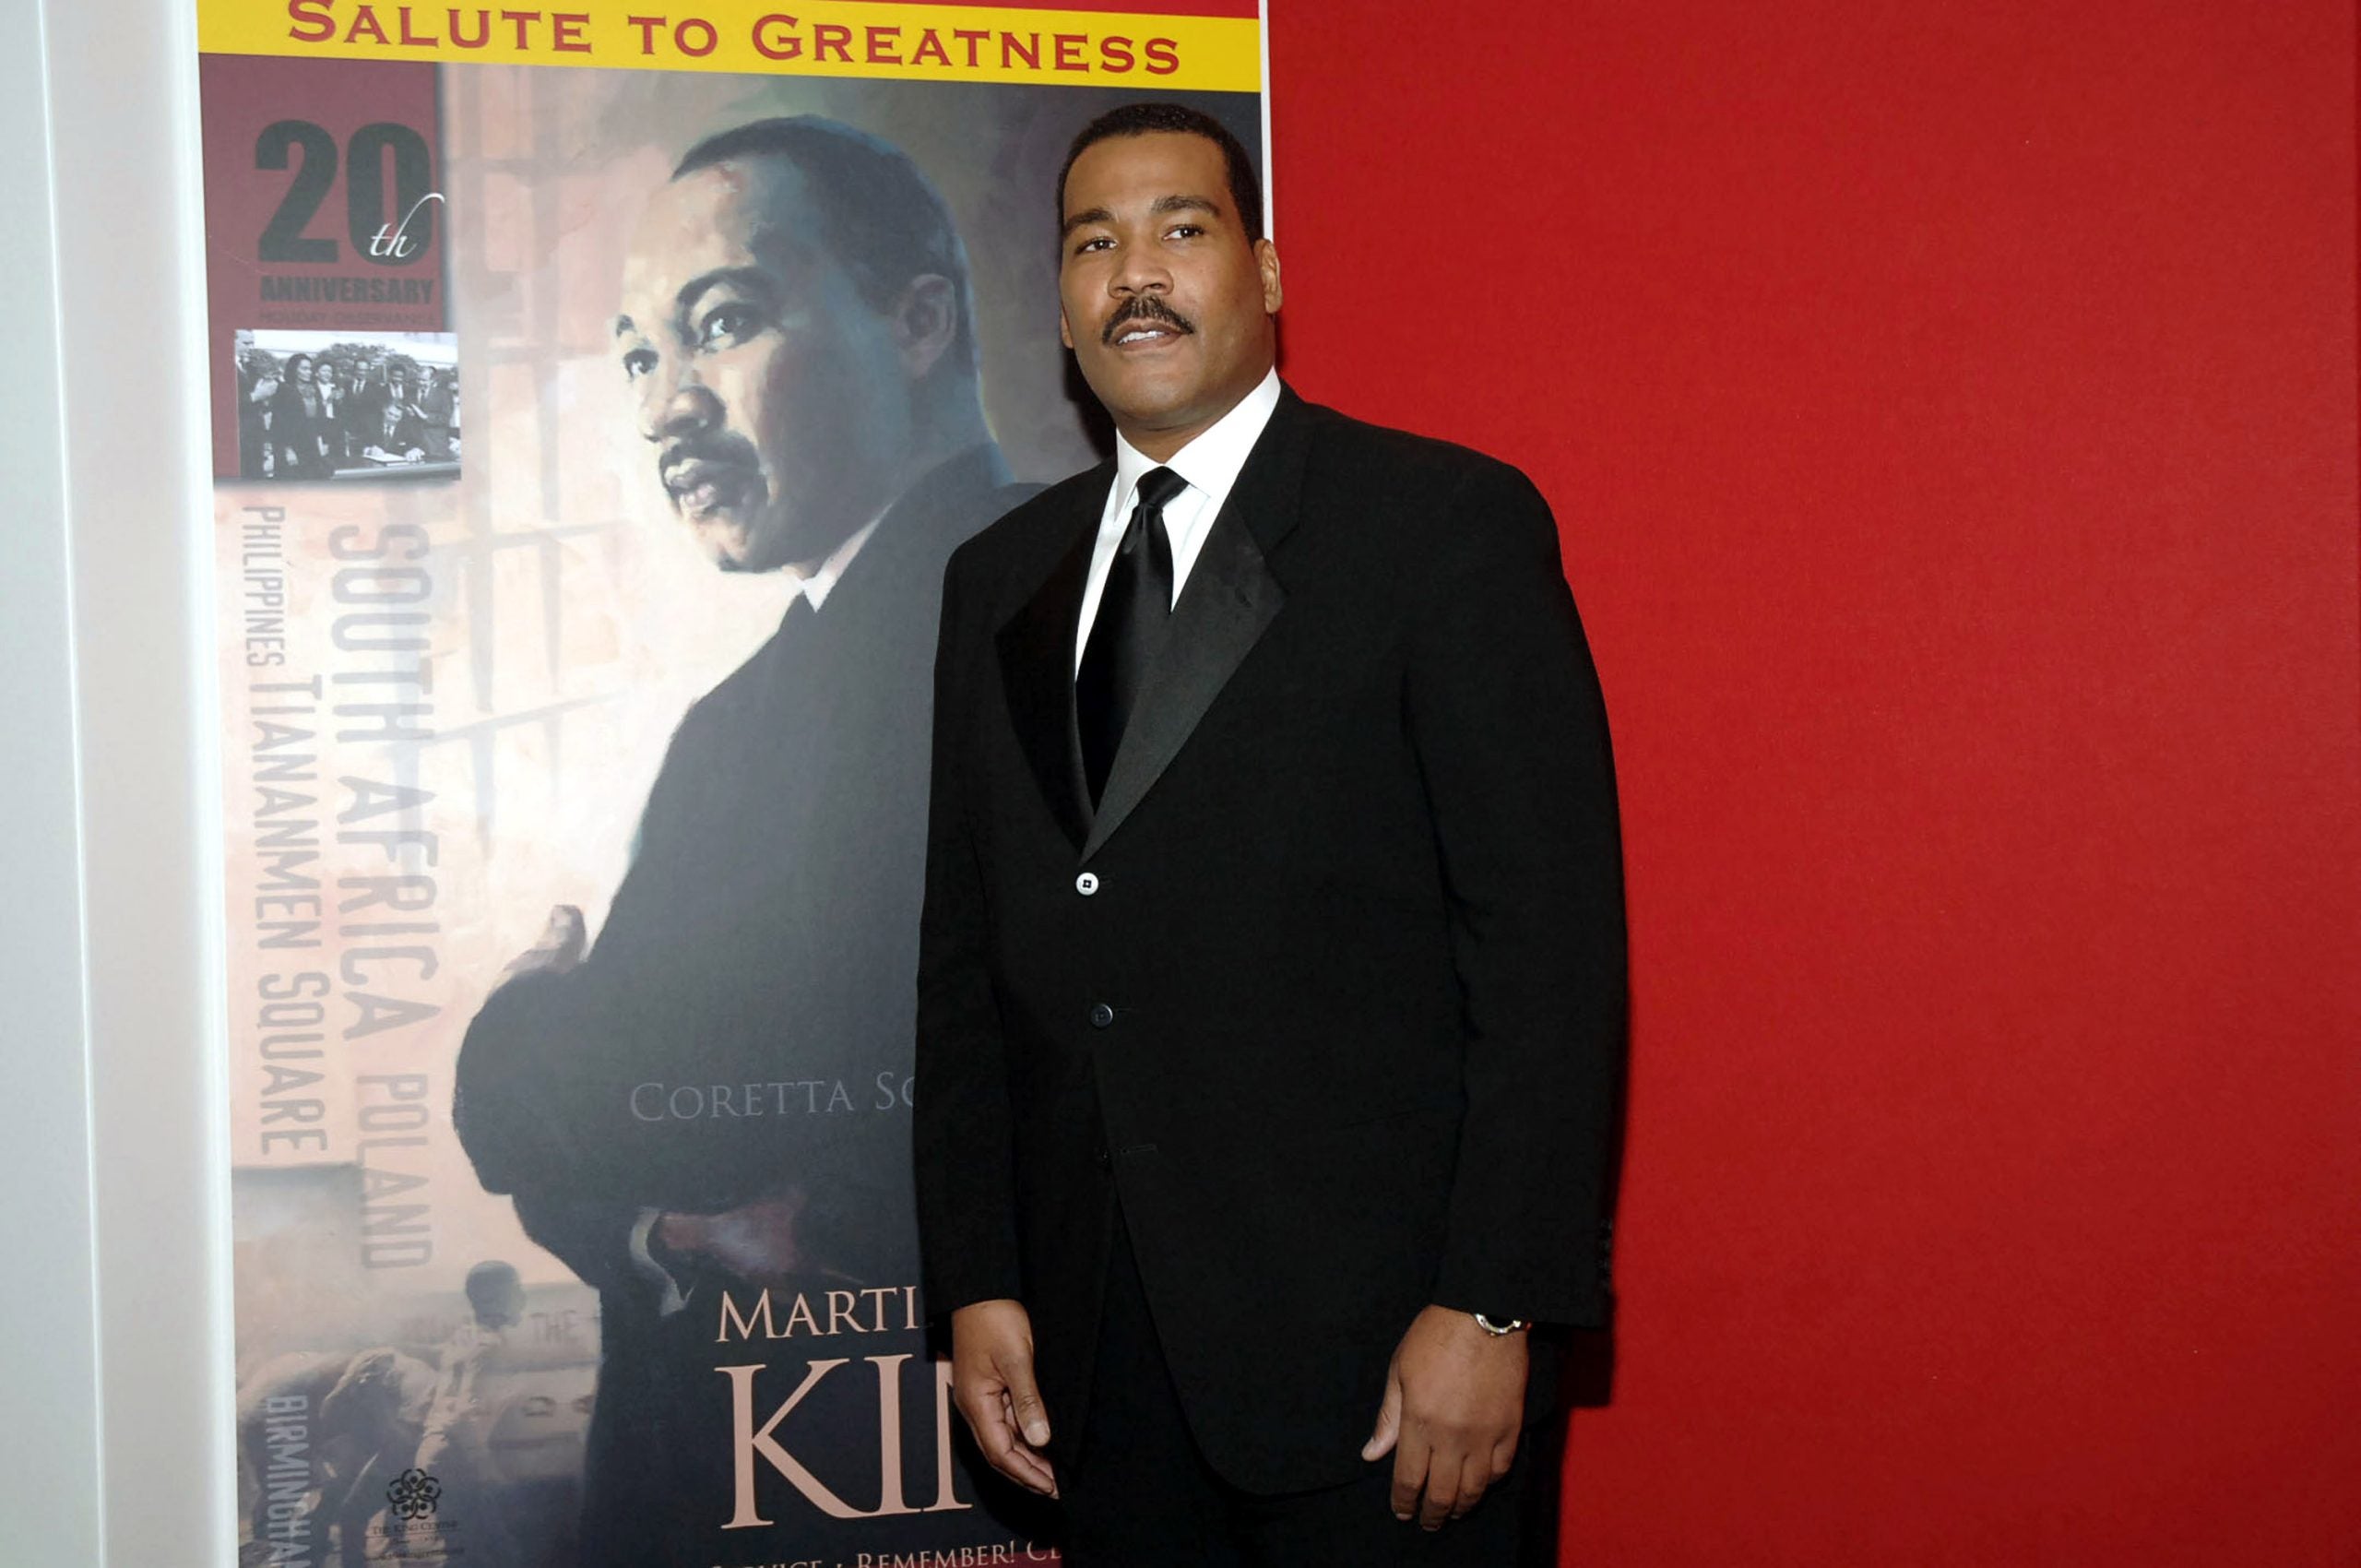 Dexter King, Son Of Dr. Martin Luther King Jr. And Coretta Scott King, Dies Of Cancer At 62